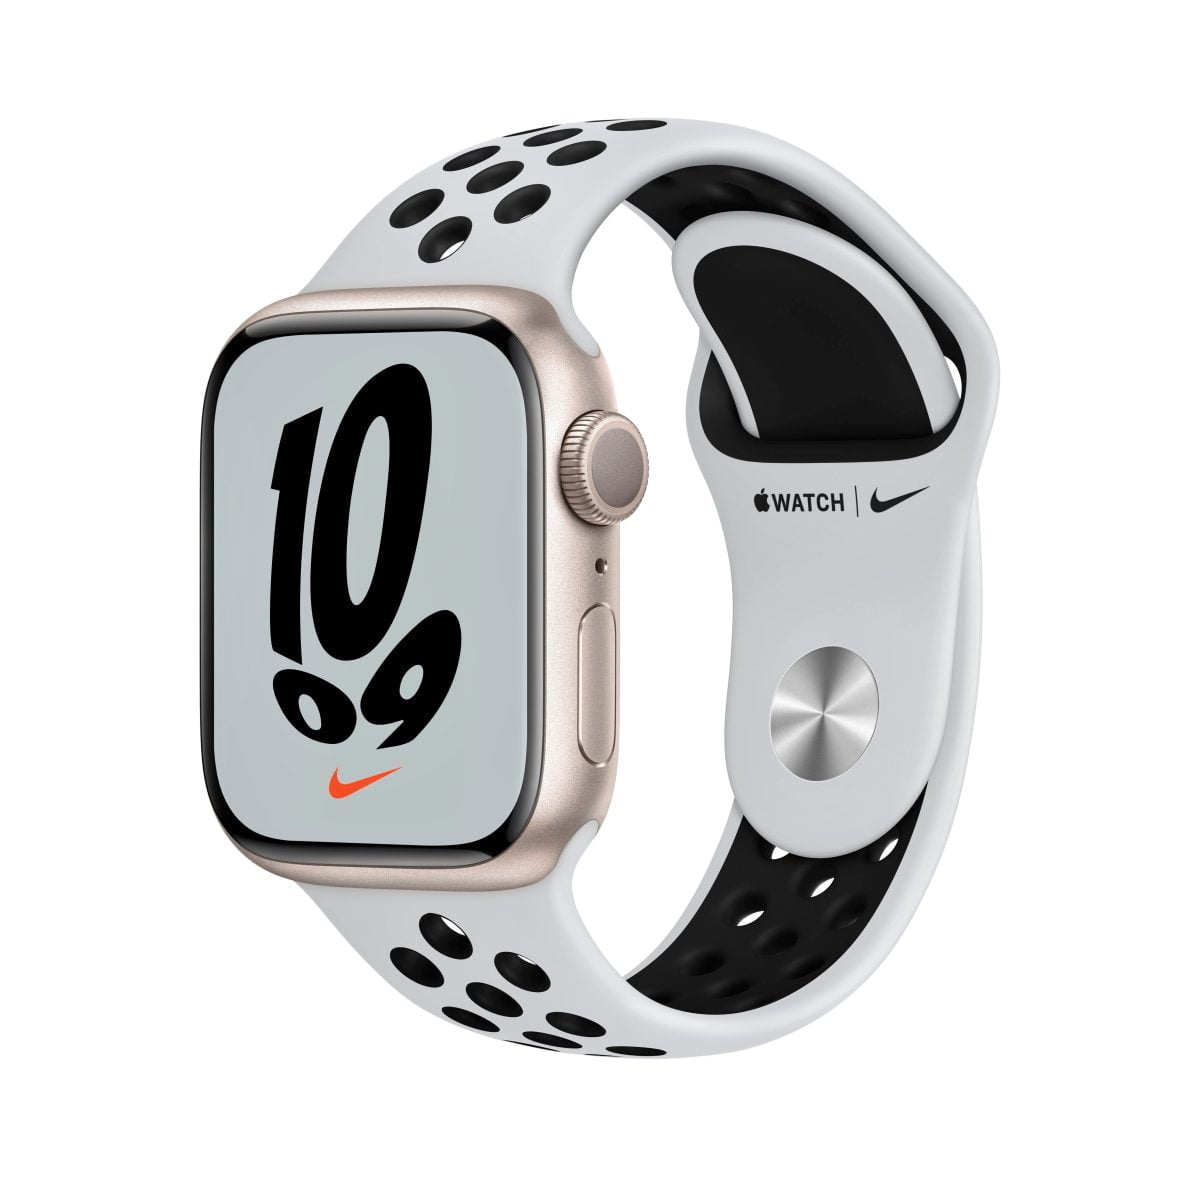 5706674 Sd Scaled Apple &Amp;Lt;H1 Class=&Amp;Quot;Heading-5 V-Fw-Regular&Amp;Quot;&Amp;Gt;Apple Watch Nike Series 7 (Gps) 45Mm Starlight Aluminum Case With Pure Platinum/Black Nike Sport Band - Starlight&Amp;Lt;/H1&Amp;Gt; &Amp;Lt;H2&Amp;Gt;Model: Mkna3&Amp;Lt;/H2&Amp;Gt; Https://Www.youtube.com/Watch?V=Mmdq-Gwbnze &Amp;Lt;Div Class=&Amp;Quot;Long-Description-Container Body-Copy &Amp;Quot;&Amp;Gt; &Amp;Lt;Div Class=&Amp;Quot;Html-Fragment&Amp;Quot;&Amp;Gt; &Amp;Lt;Div&Amp;Gt; &Amp;Lt;Div&Amp;Gt;The Largest, Most Advanced Always-On Retina Display Yet Makes Everything You Do With Your Apple Watch Series 7 Bigger And Better. Series 7 Is The Most Durable Apple Watch Ever Built, With An, Even More, Crack-Resistant Front Crystal. Advanced Features Let You Measure Your Blood Oxygen Level,¹ Take An Ecg Anytime,² And Access Mindfulness And Sleep Tracking Apps. You Can Also Track Dozens Of Workouts, Including New Tai Chi And Pilates.&Amp;Lt;/Div&Amp;Gt; &Amp;Lt;/Div&Amp;Gt; &Amp;Lt;/Div&Amp;Gt; &Amp;Lt;/Div&Amp;Gt; Apple Watch Nike Series Apple Watch Nike Series 7 (Gps) 45Mm - Starlight